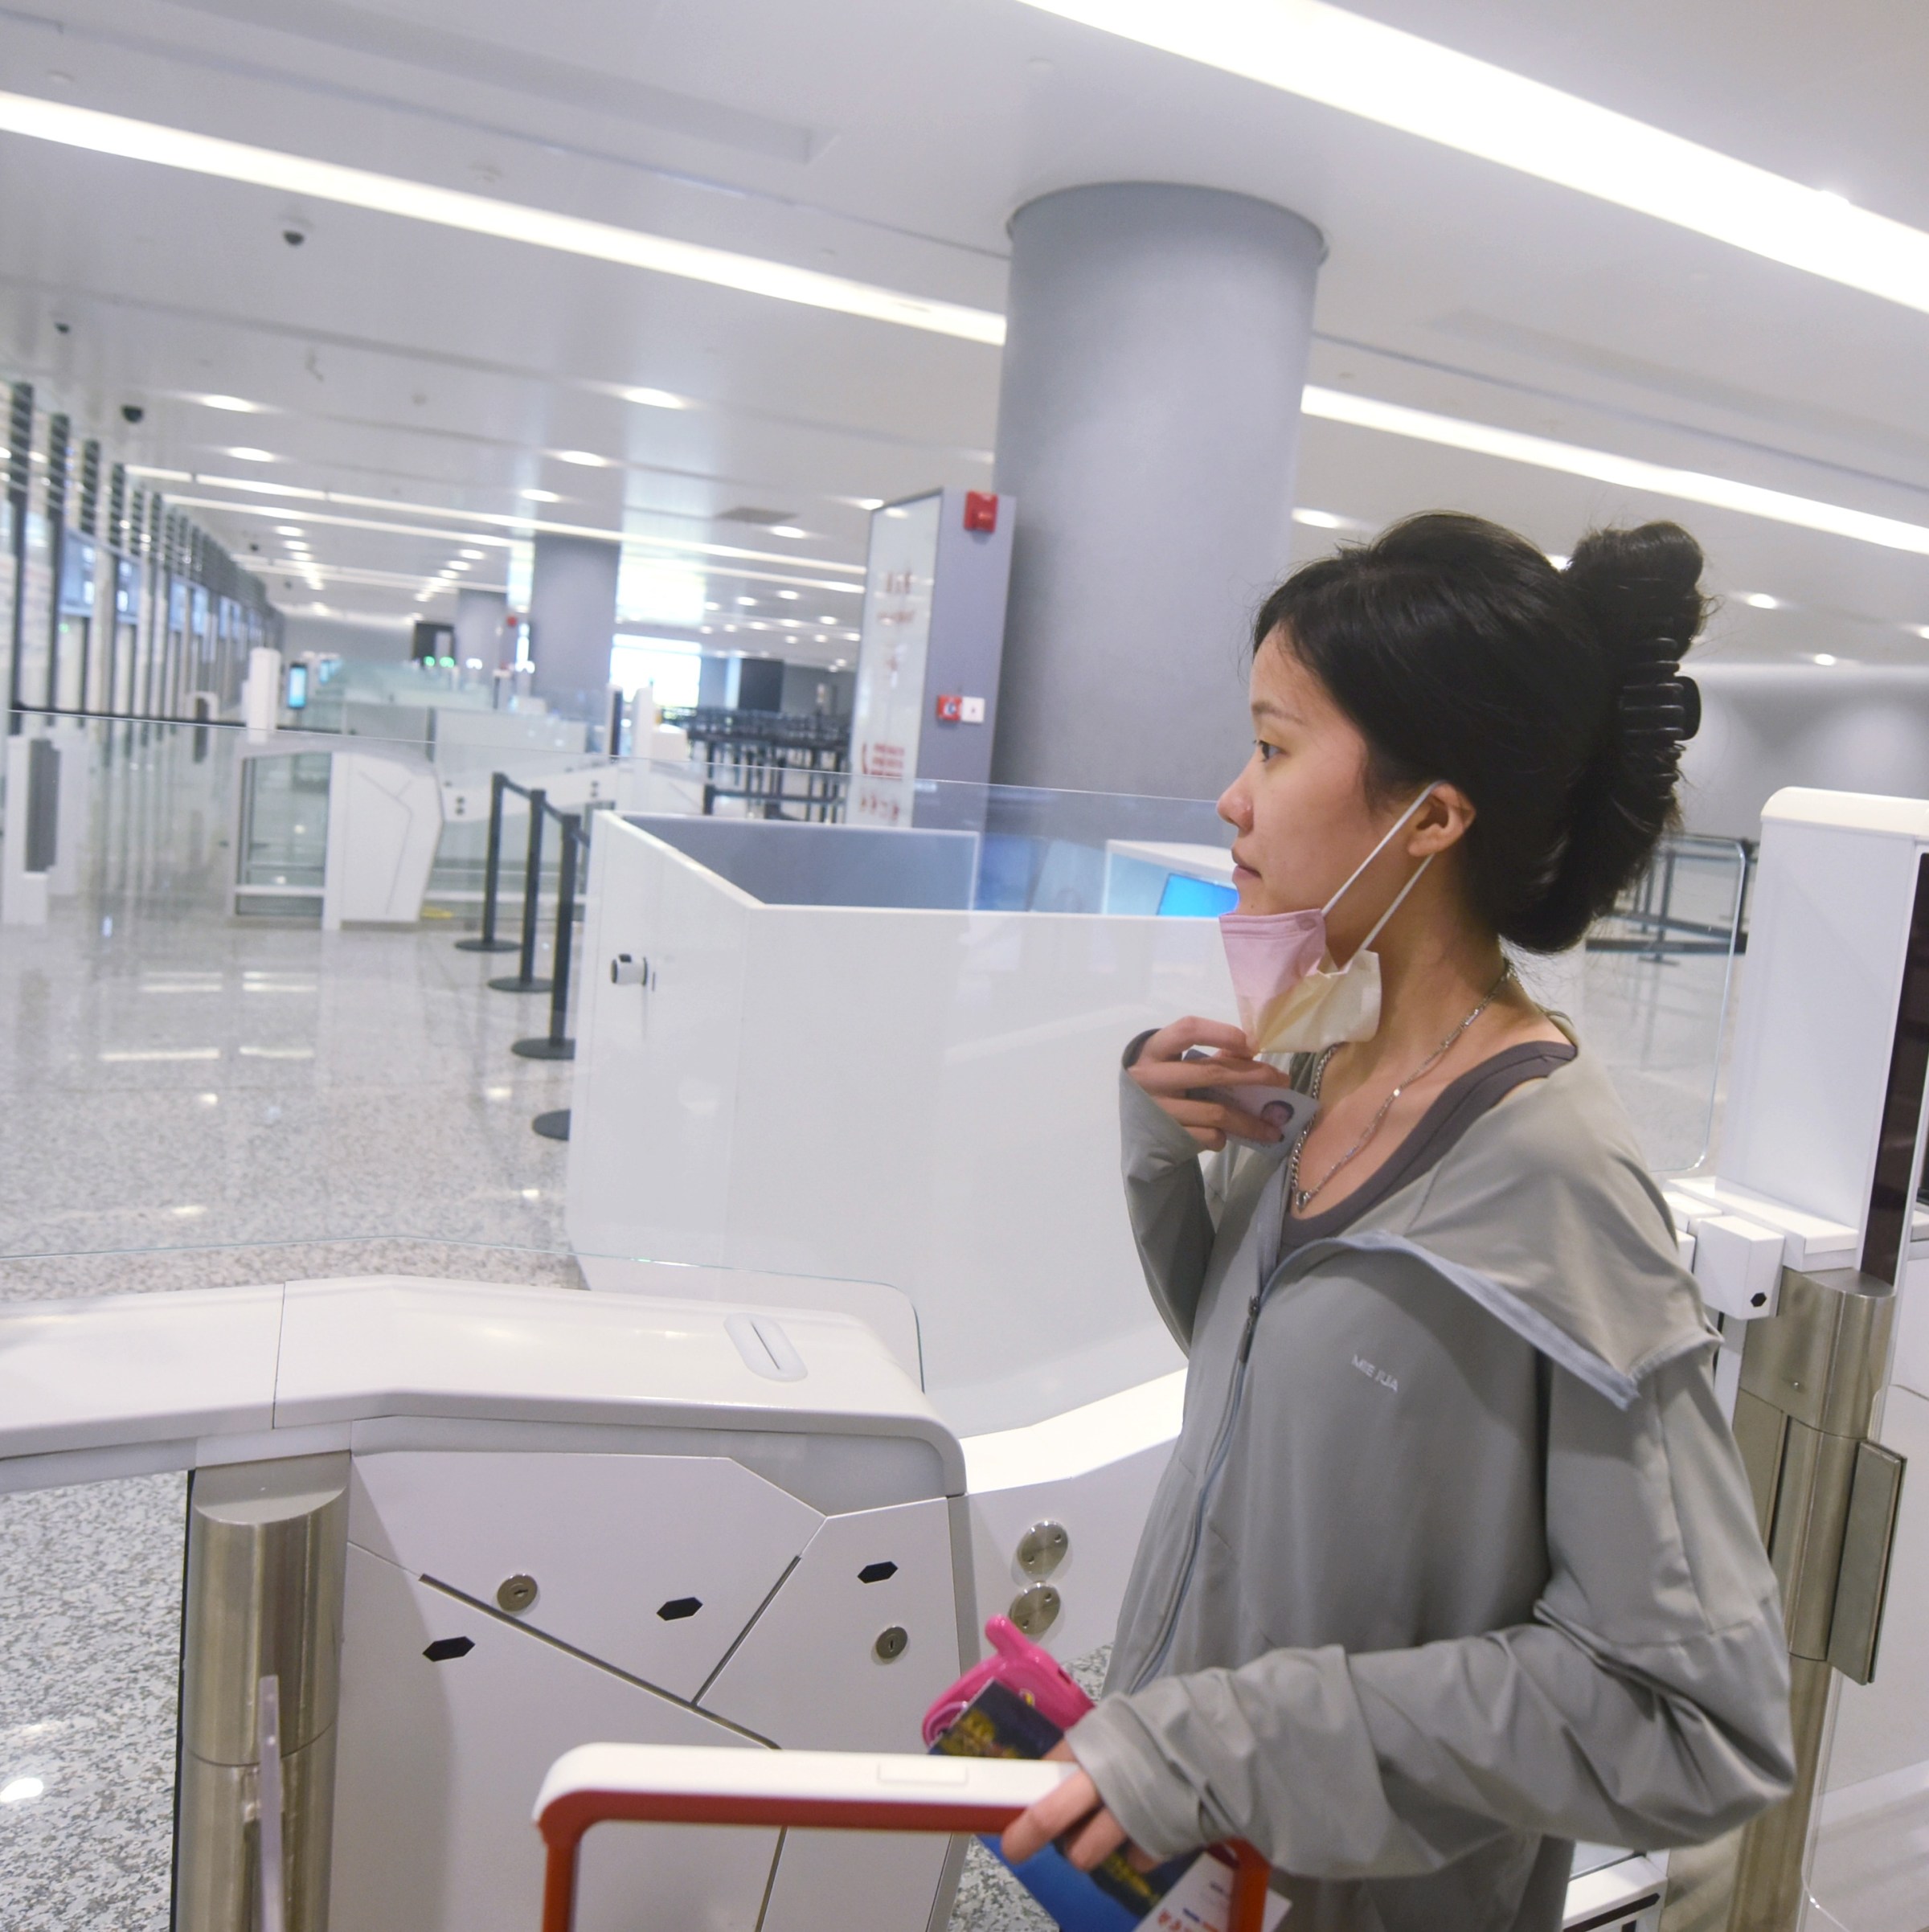 Traveling this summer? Maybe don’t let the airport scan your face.